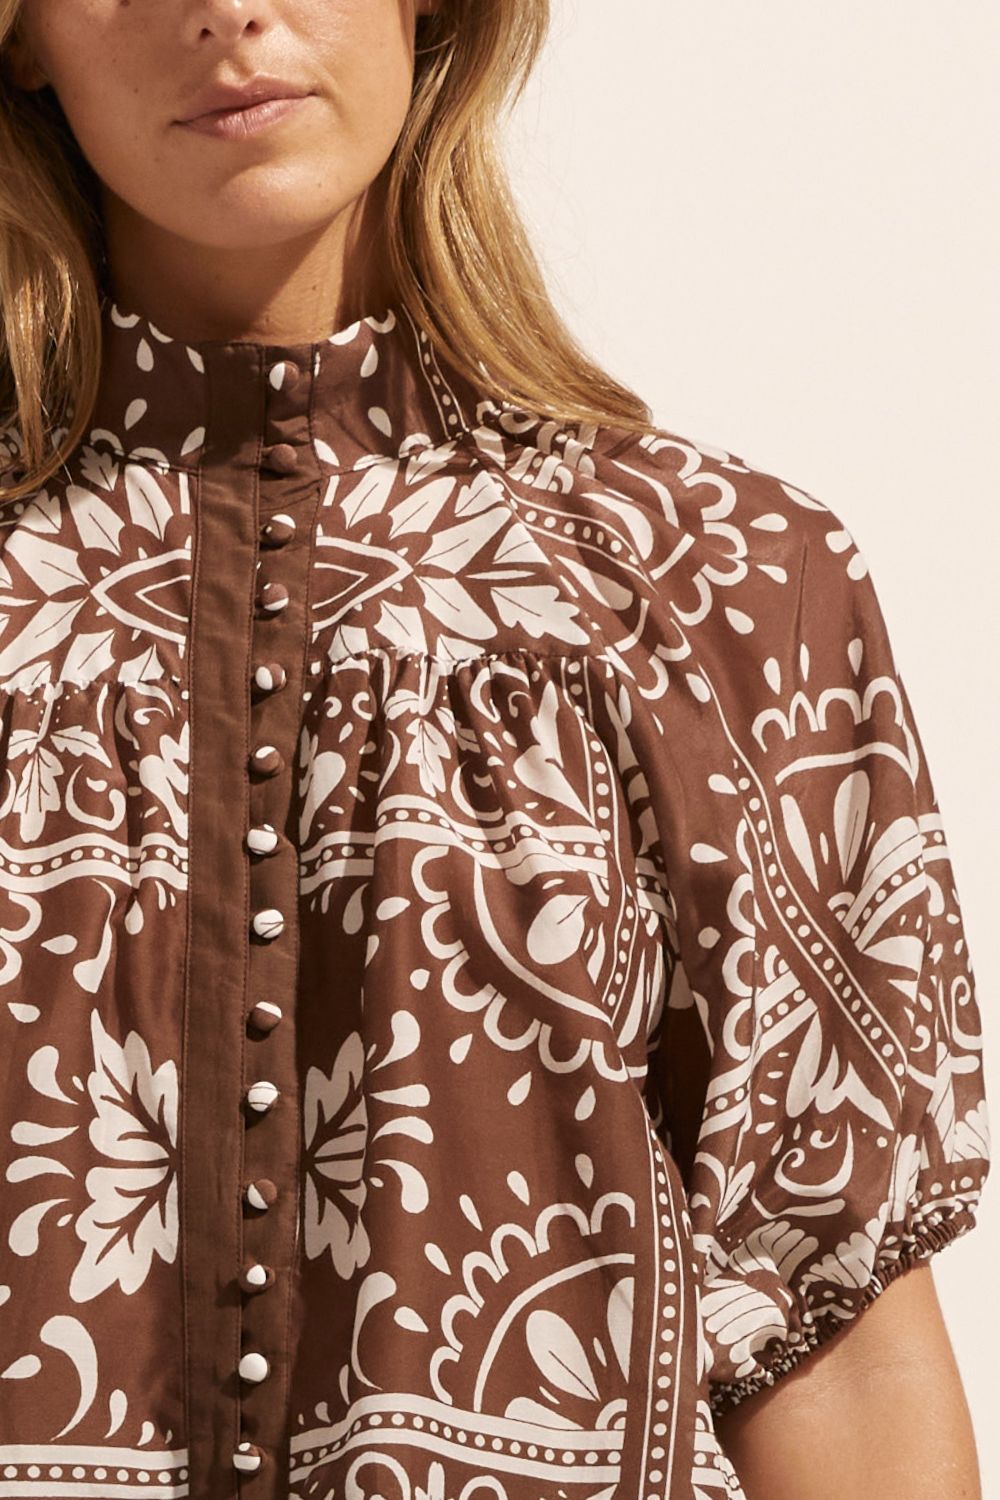 brown and white print, top, high neck, button down, mid length sleeve, close up image